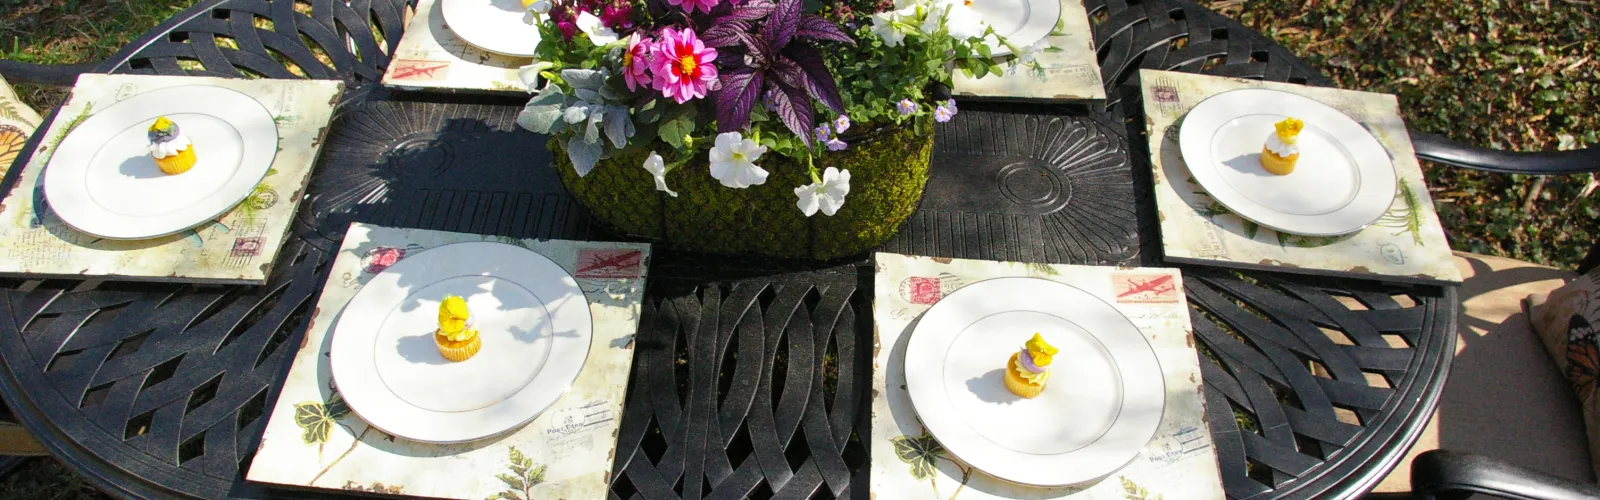 Outdoor garden party with flower centerpiece and plants with desserts